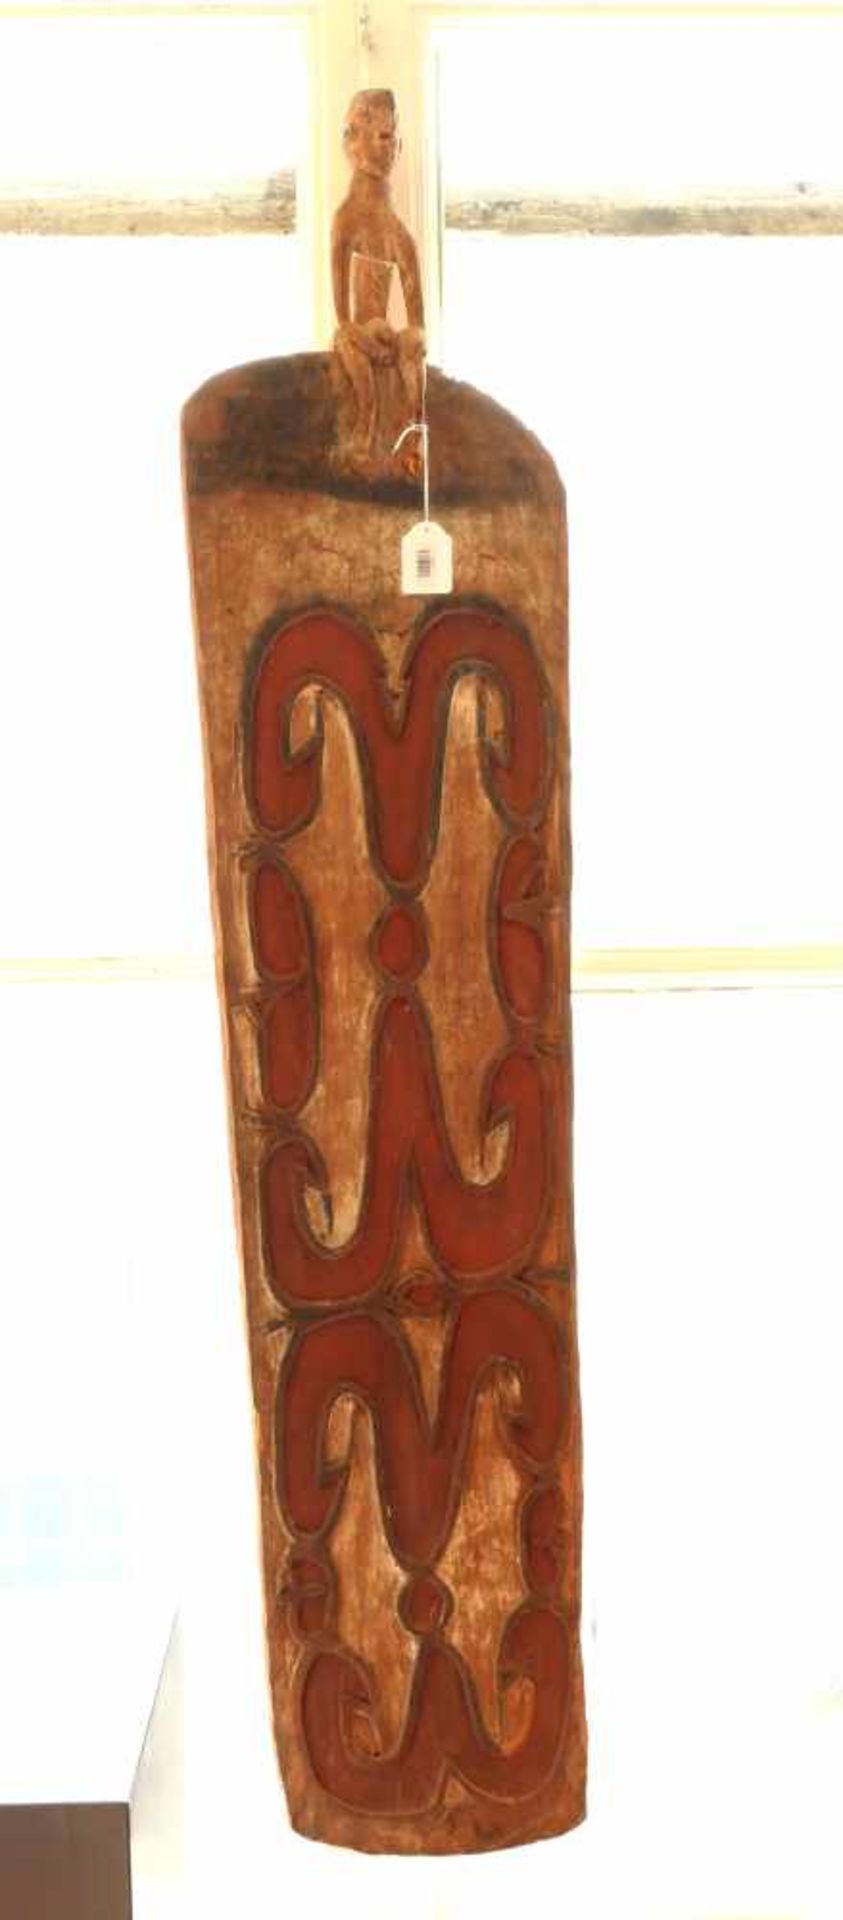 PNG, Asmat, small shield with anthropomorphic figure on top,decorations in white, red and black - Bild 2 aus 4